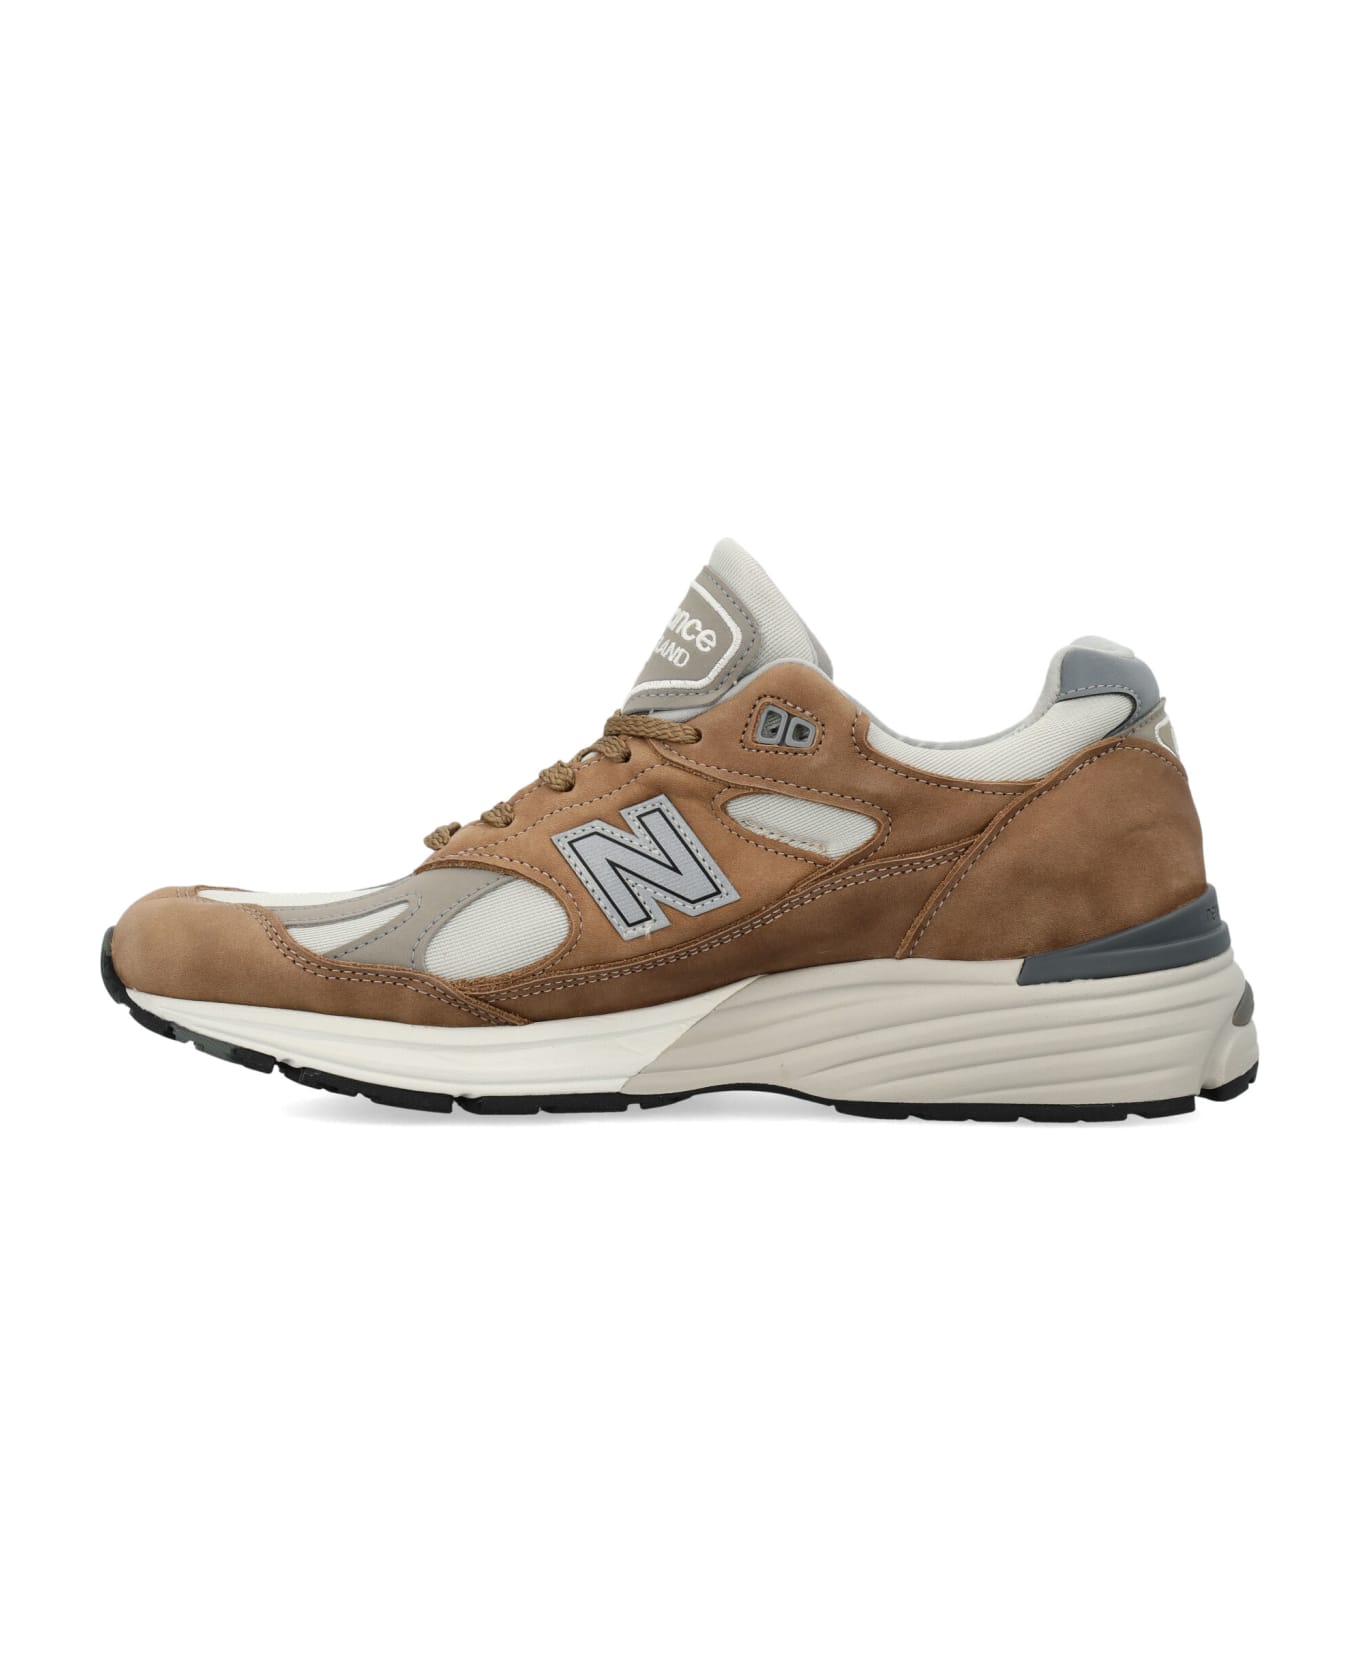 New Balance 991 Sneakers - BROWN スニーカー